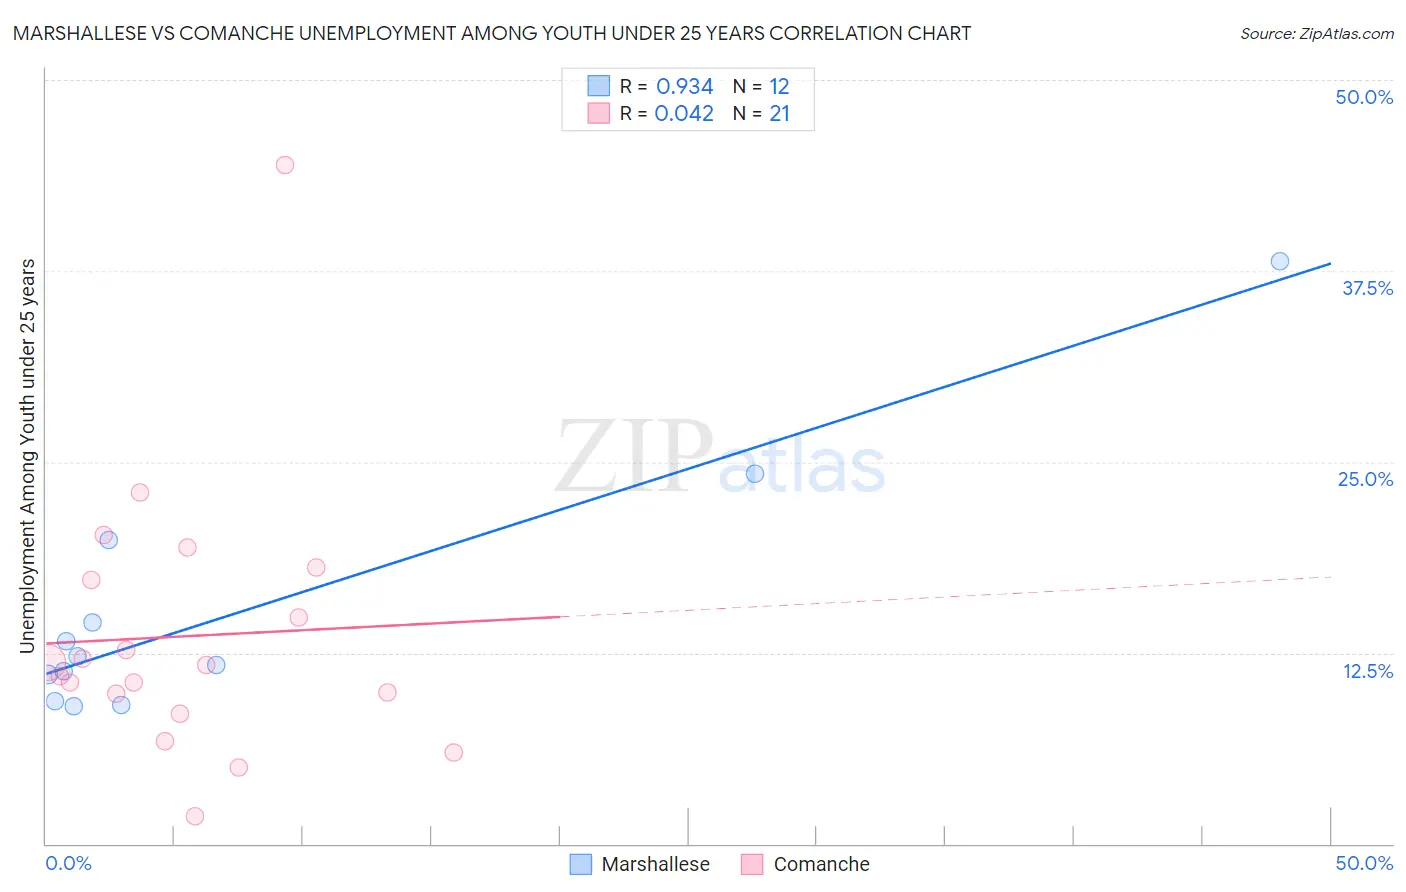 Marshallese vs Comanche Unemployment Among Youth under 25 years